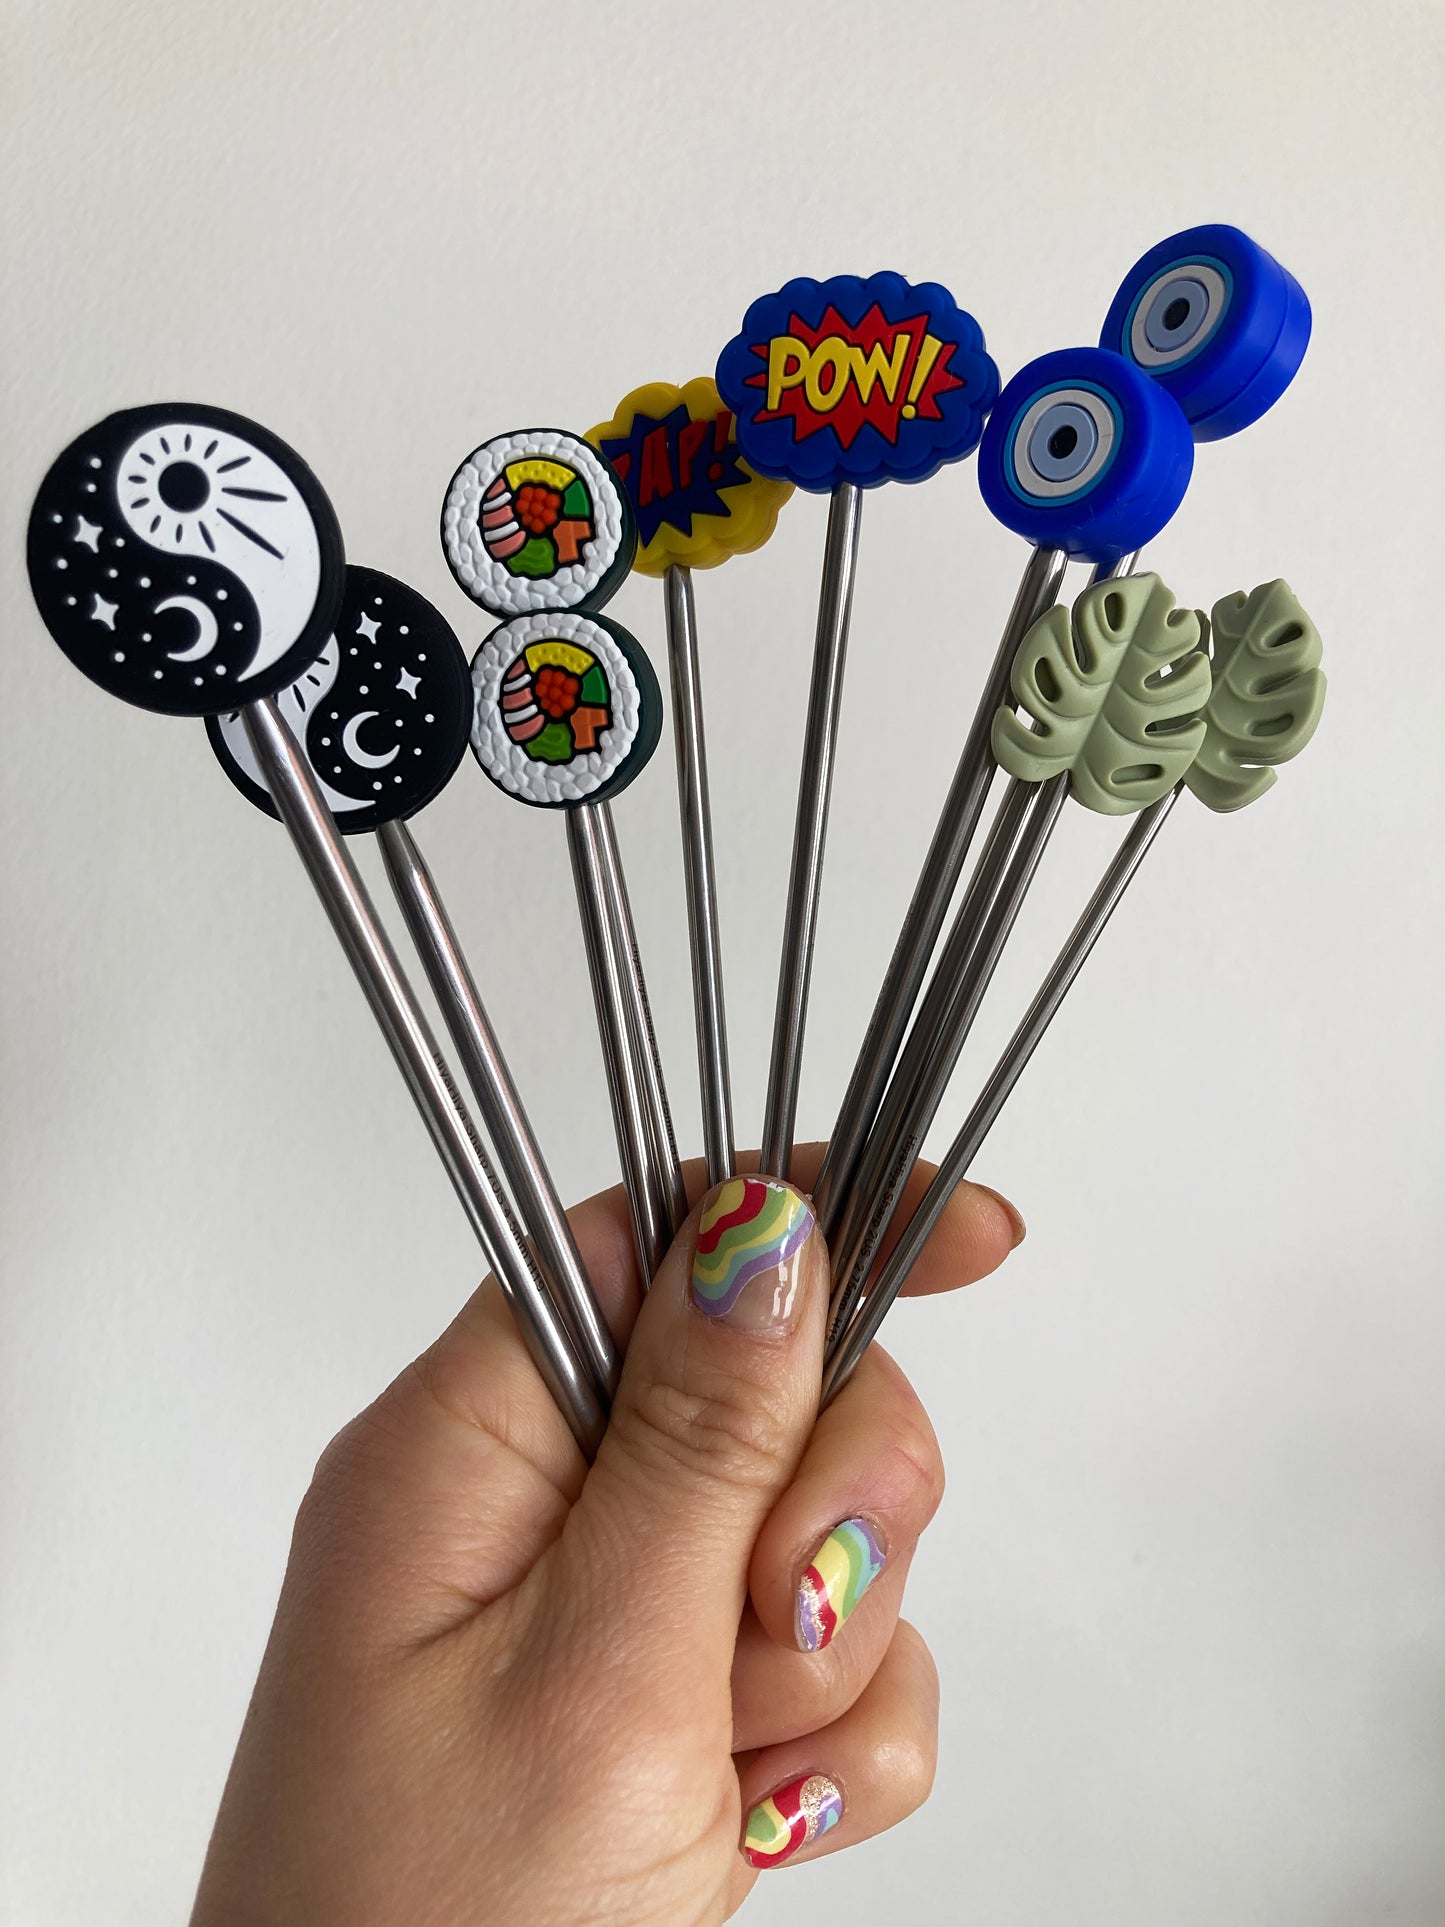 A group of knitting needle protectors in modern  fun designs